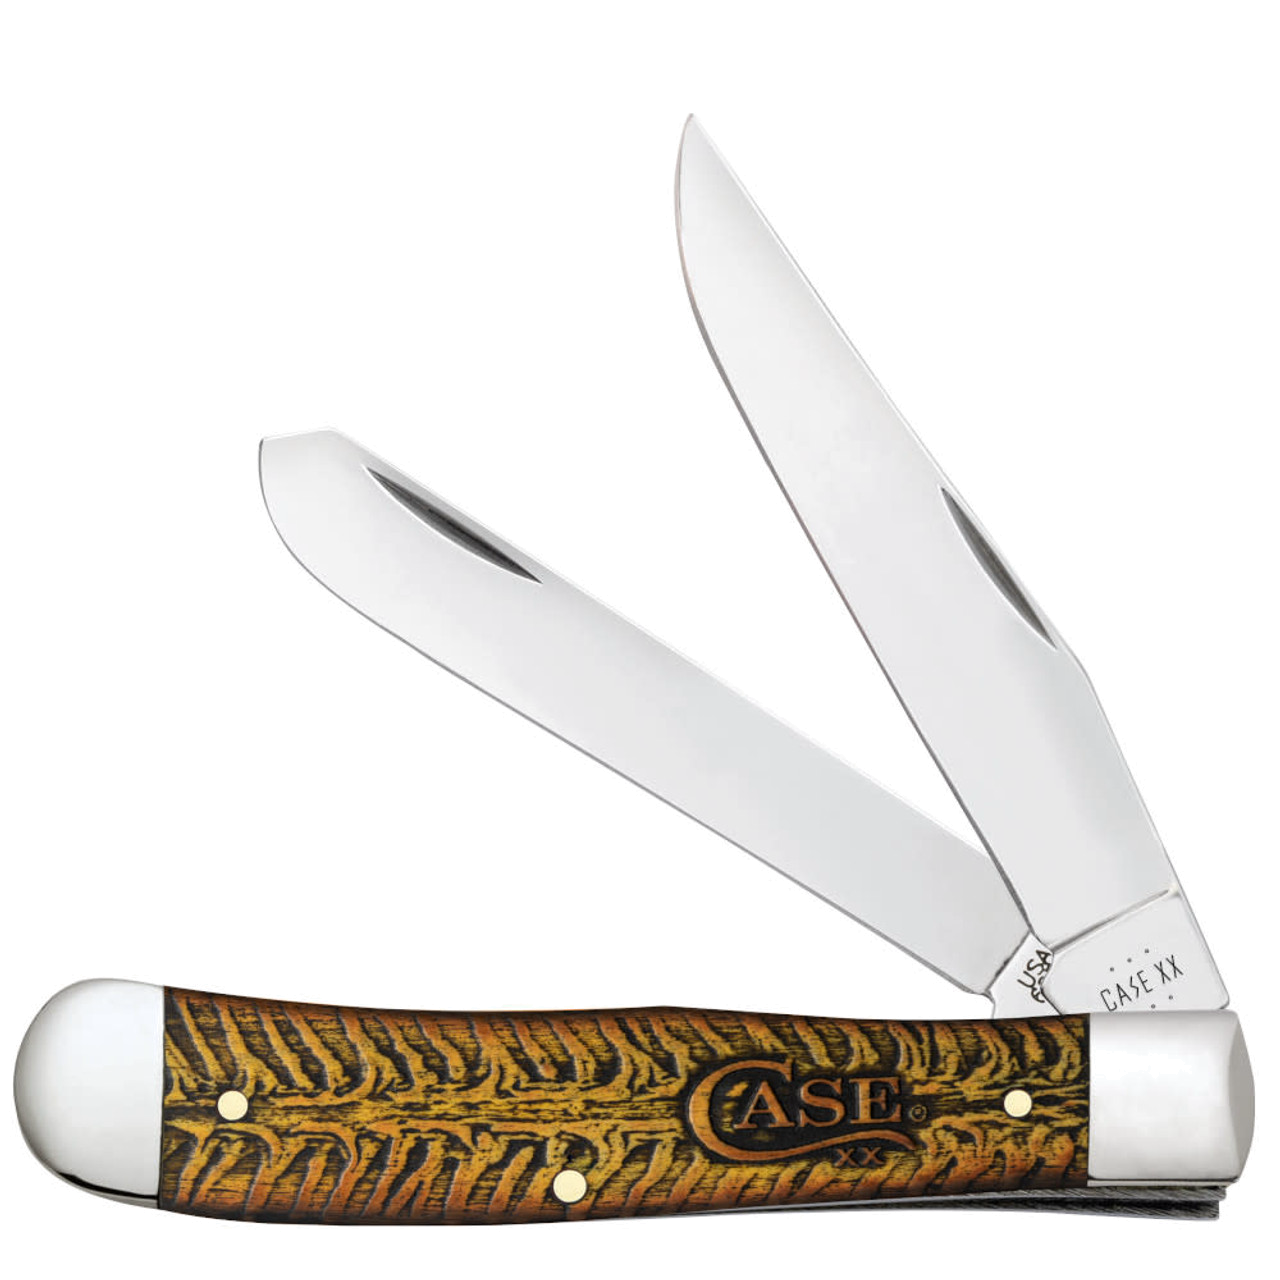 product image for Case Trapper 6254 SS Golden Pinecone Nat Bone